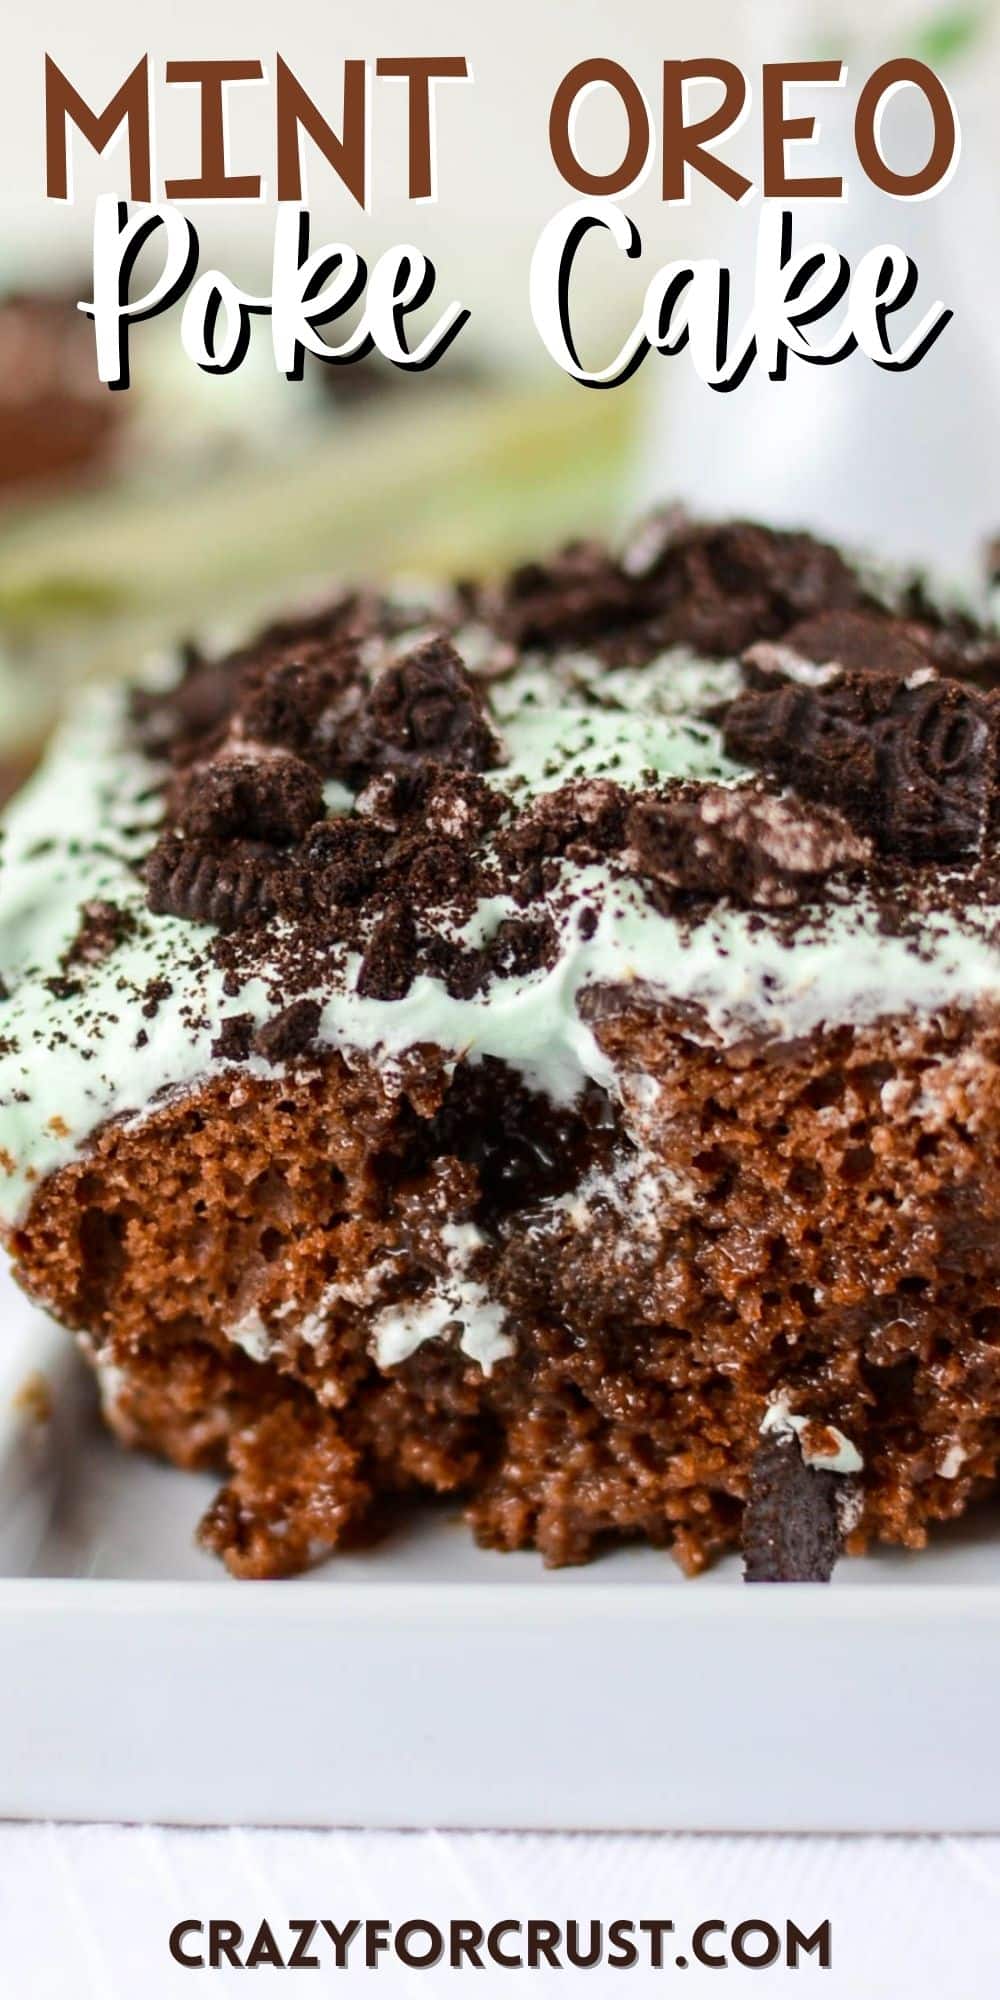 chocolate cake with mint frosting and oreo pieces on top with words on the image.